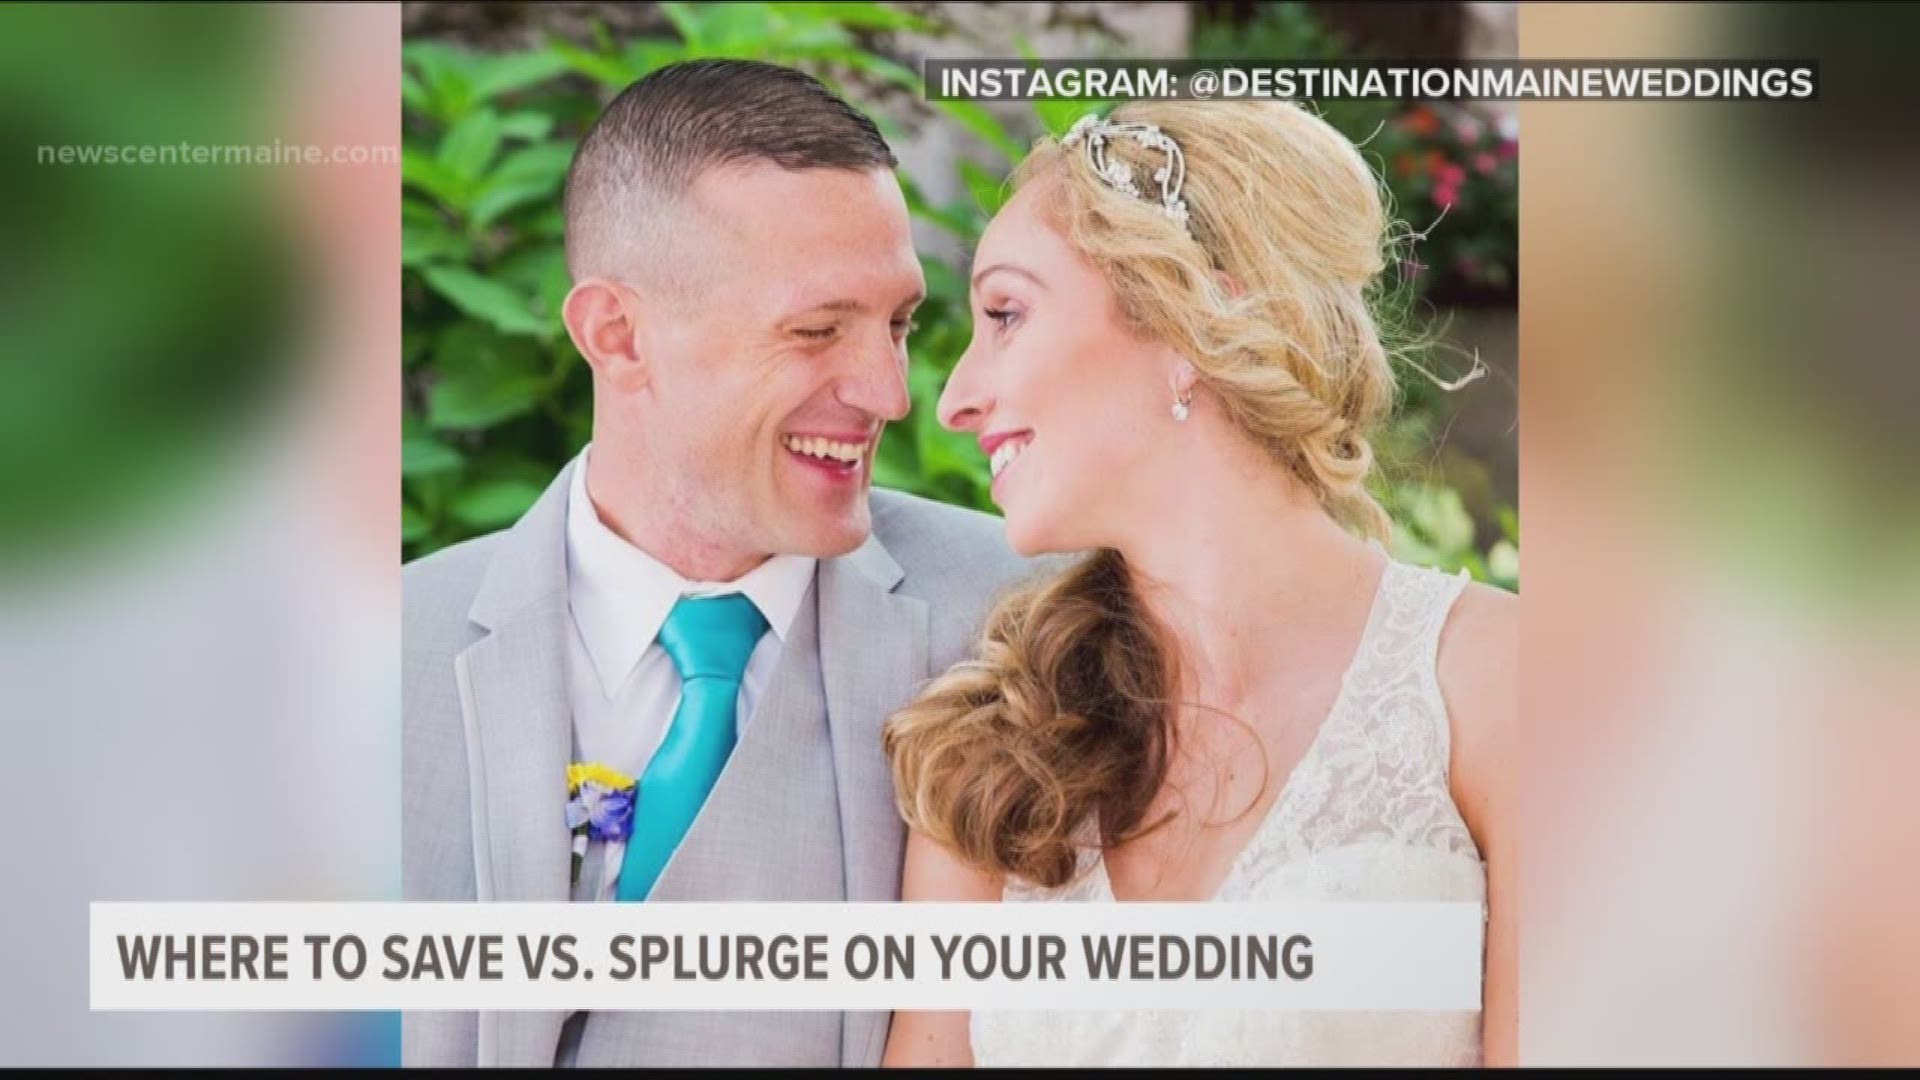 Where to save vs. splurge on your wedding